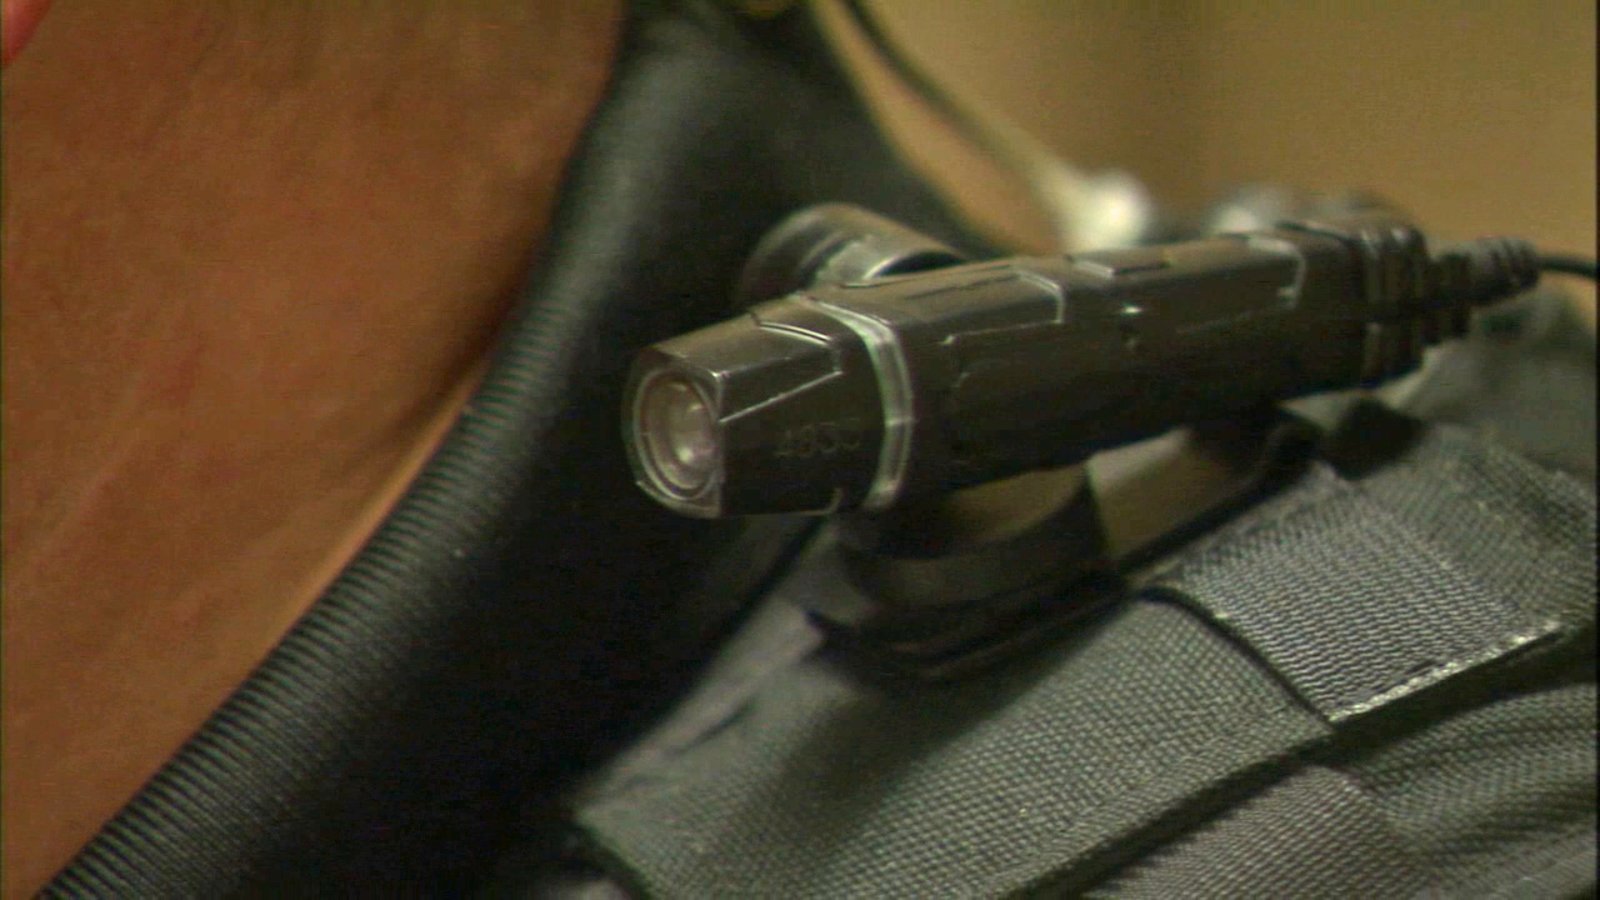 Should police officers wear body cameras?